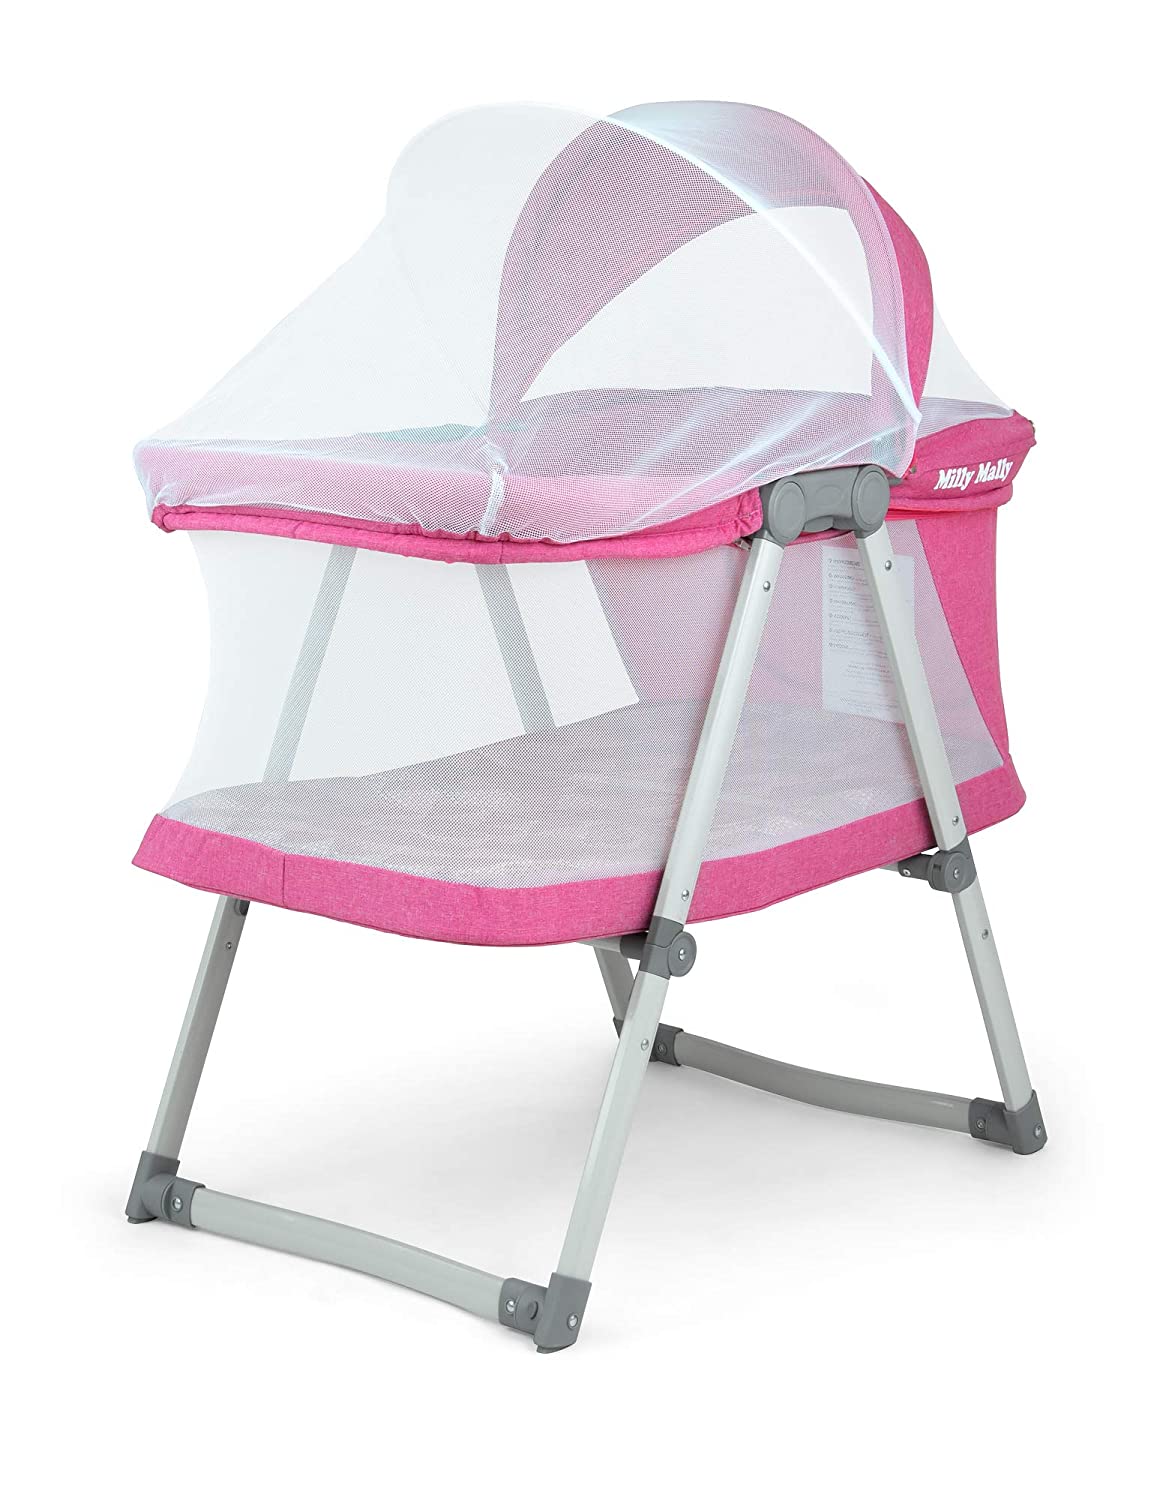 Milly Mally Jane 2-in-1 Cot Cradle Pink